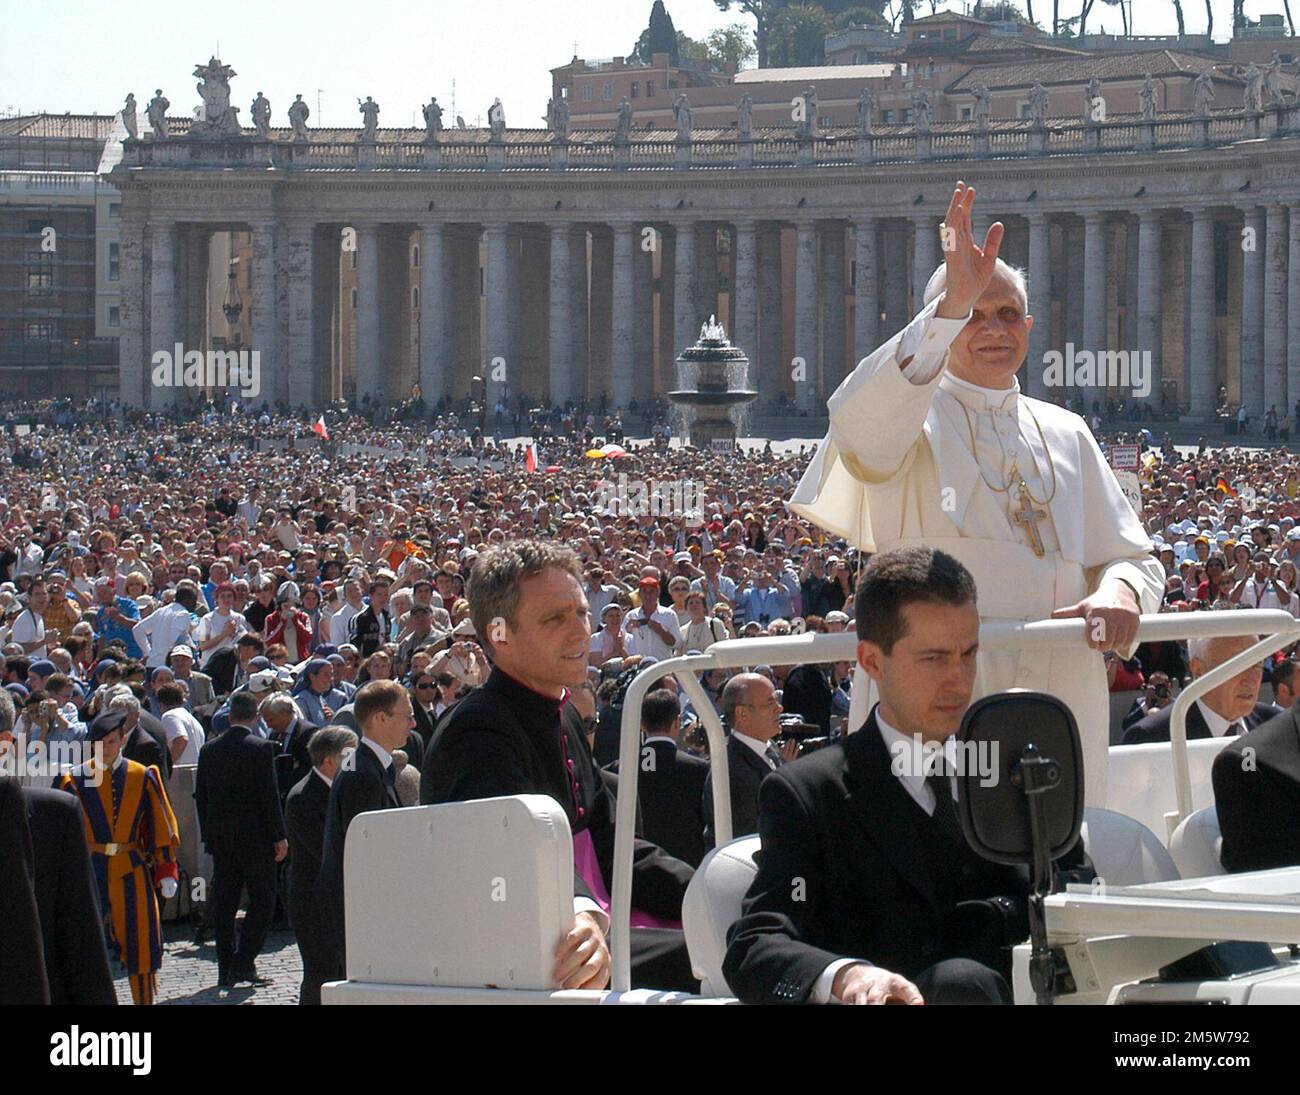 File photo - Peter's Square at the Vatican, on April 27, 2005 during the first general audience of Benedict XVI. - Former Pope Benedict XVI has died at his Vatican residence, aged 95, almost a decade after he stood down because of ailing health. He led the Catholic Church for less than eight years until, in 2013, he became the first Pope to resign since Gregory XII in 1415. Photo by Eric Vandeville/ABACAPRESS.COM Stock Photo